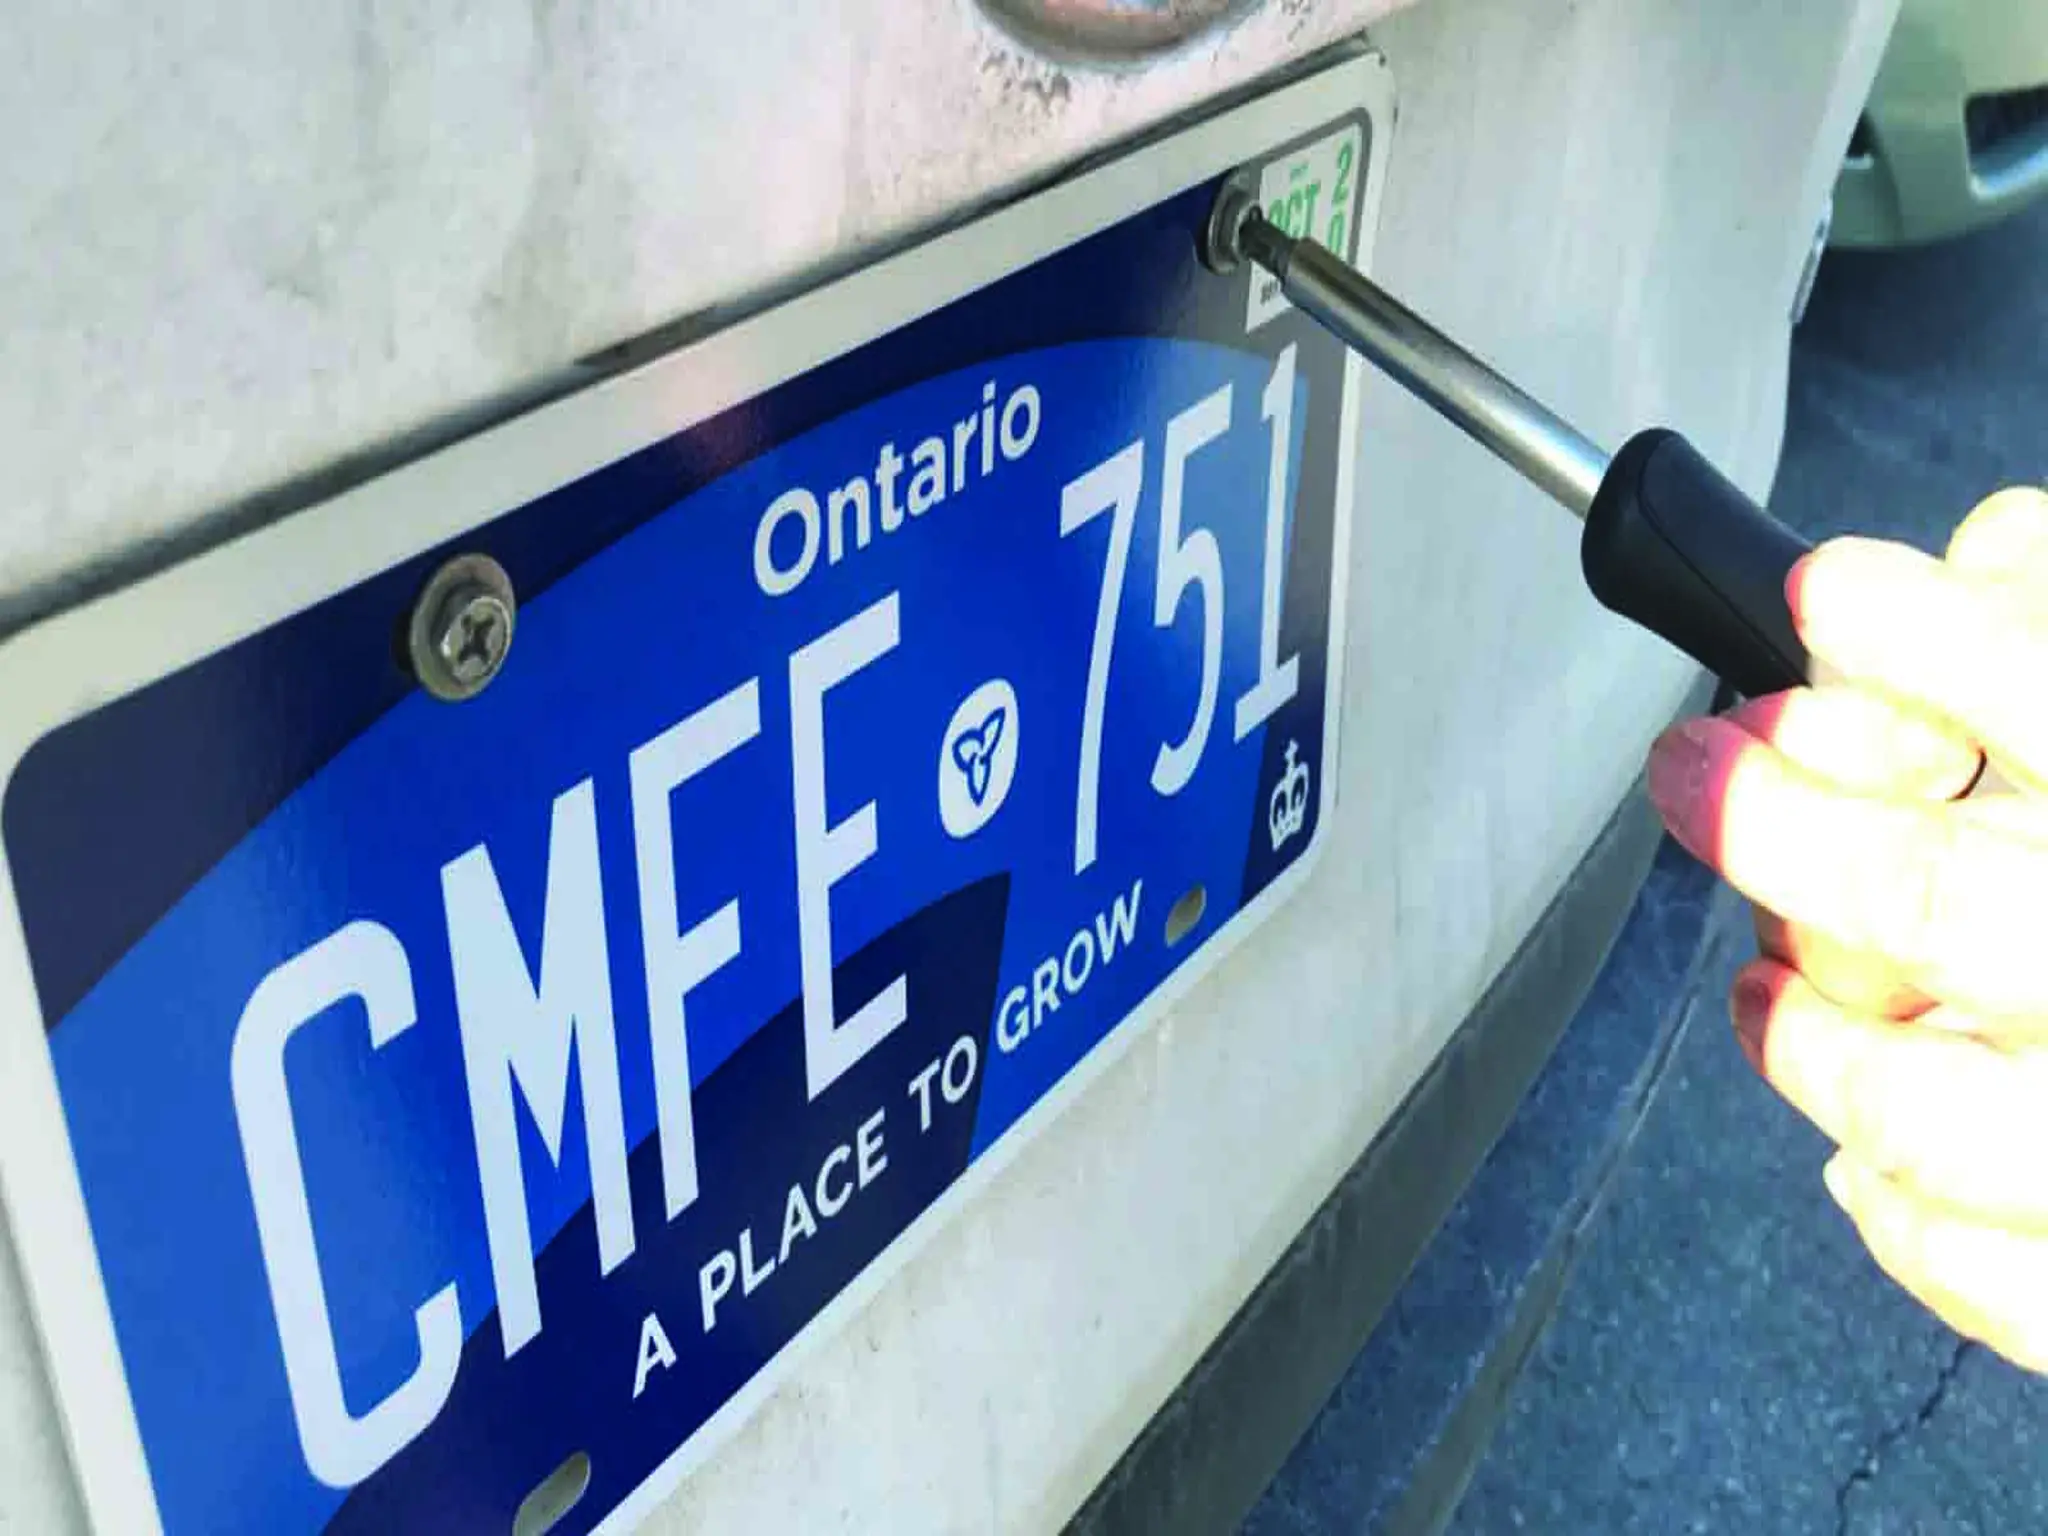 The Canadian government issues an urgent decision regarding licensing car plates